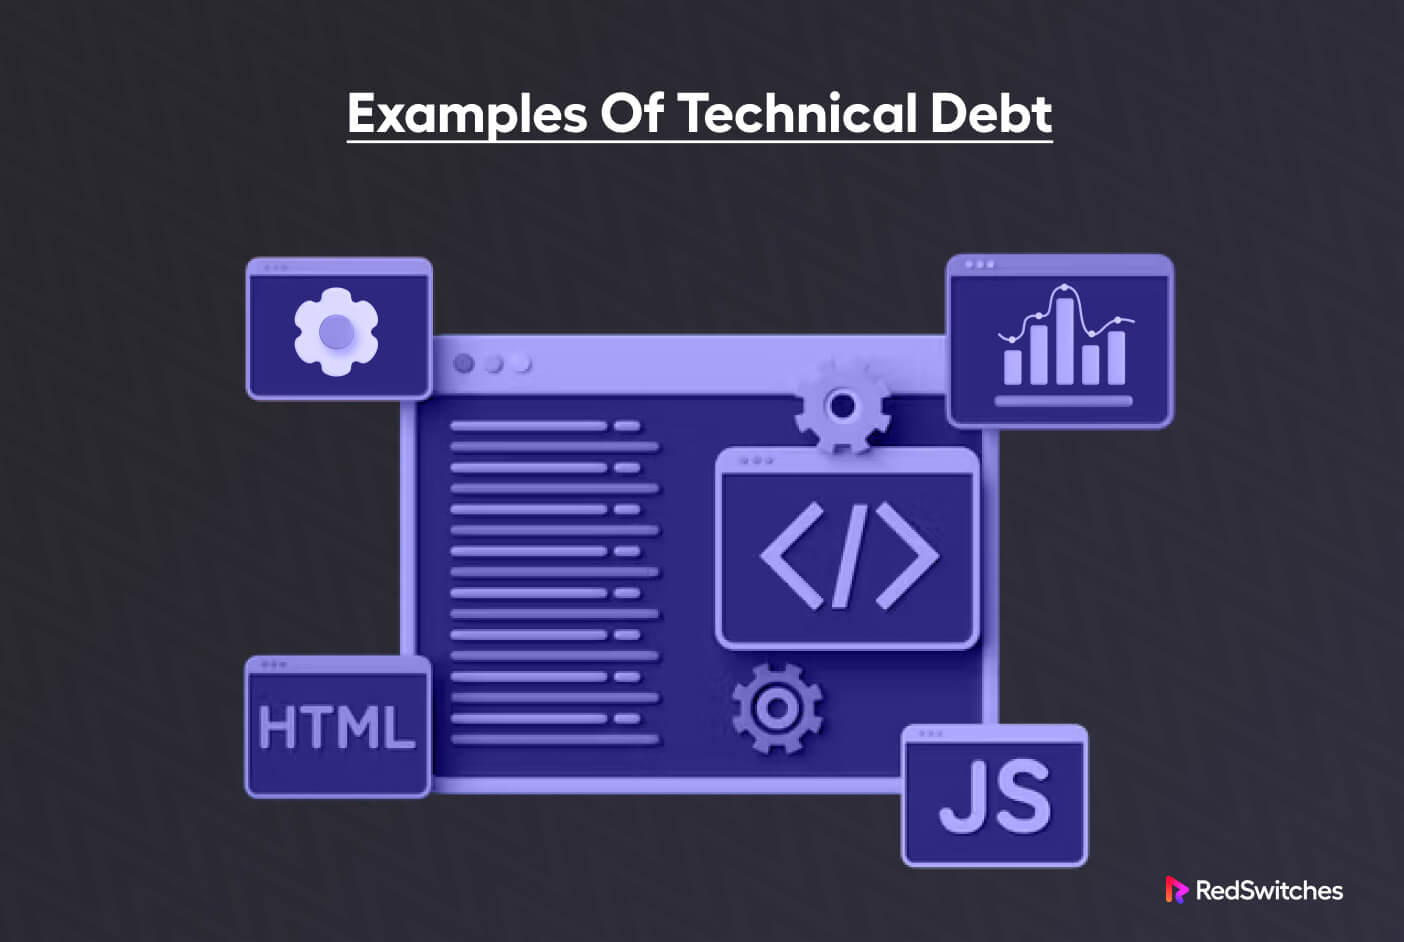 Examples of technical debt